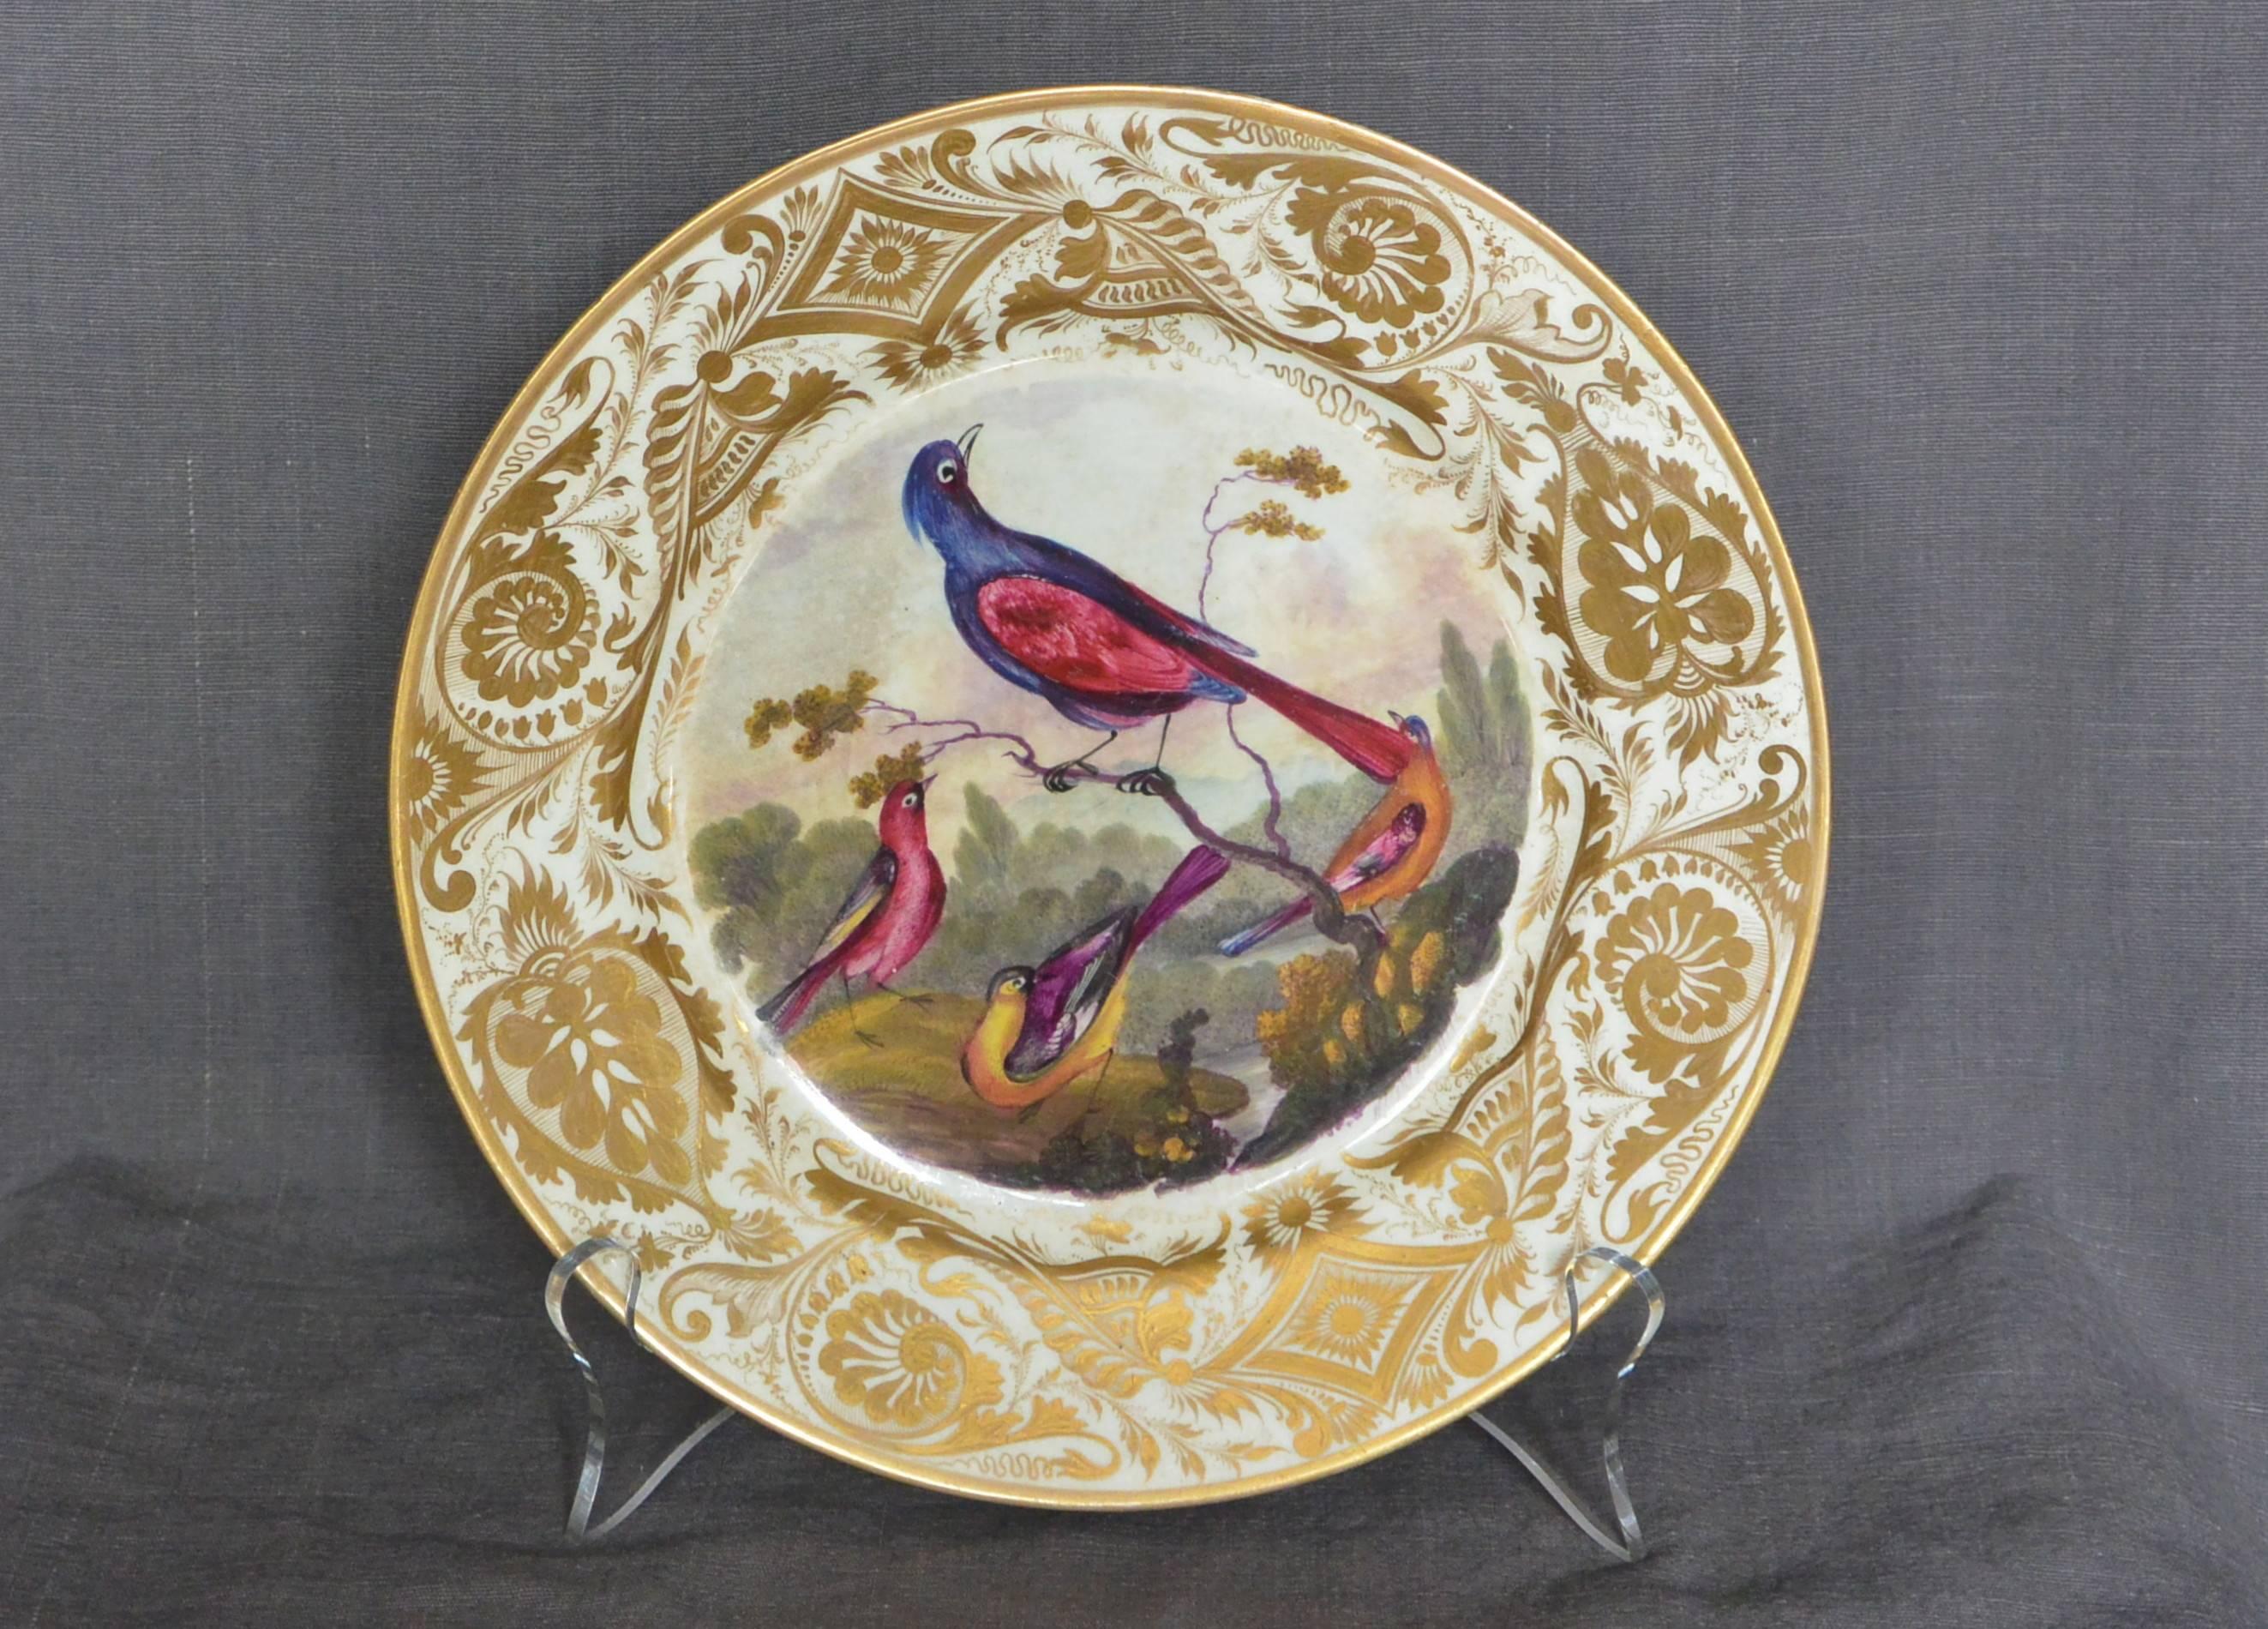 Derby gilt bird plate. Antique and rare English hand-painted and gilt plate by George Complin with gorgeous gilt border centering fantastical richly painted birds in magenta, puce, blue and yellow in a landscape. Under-glaze markings for Derby. 